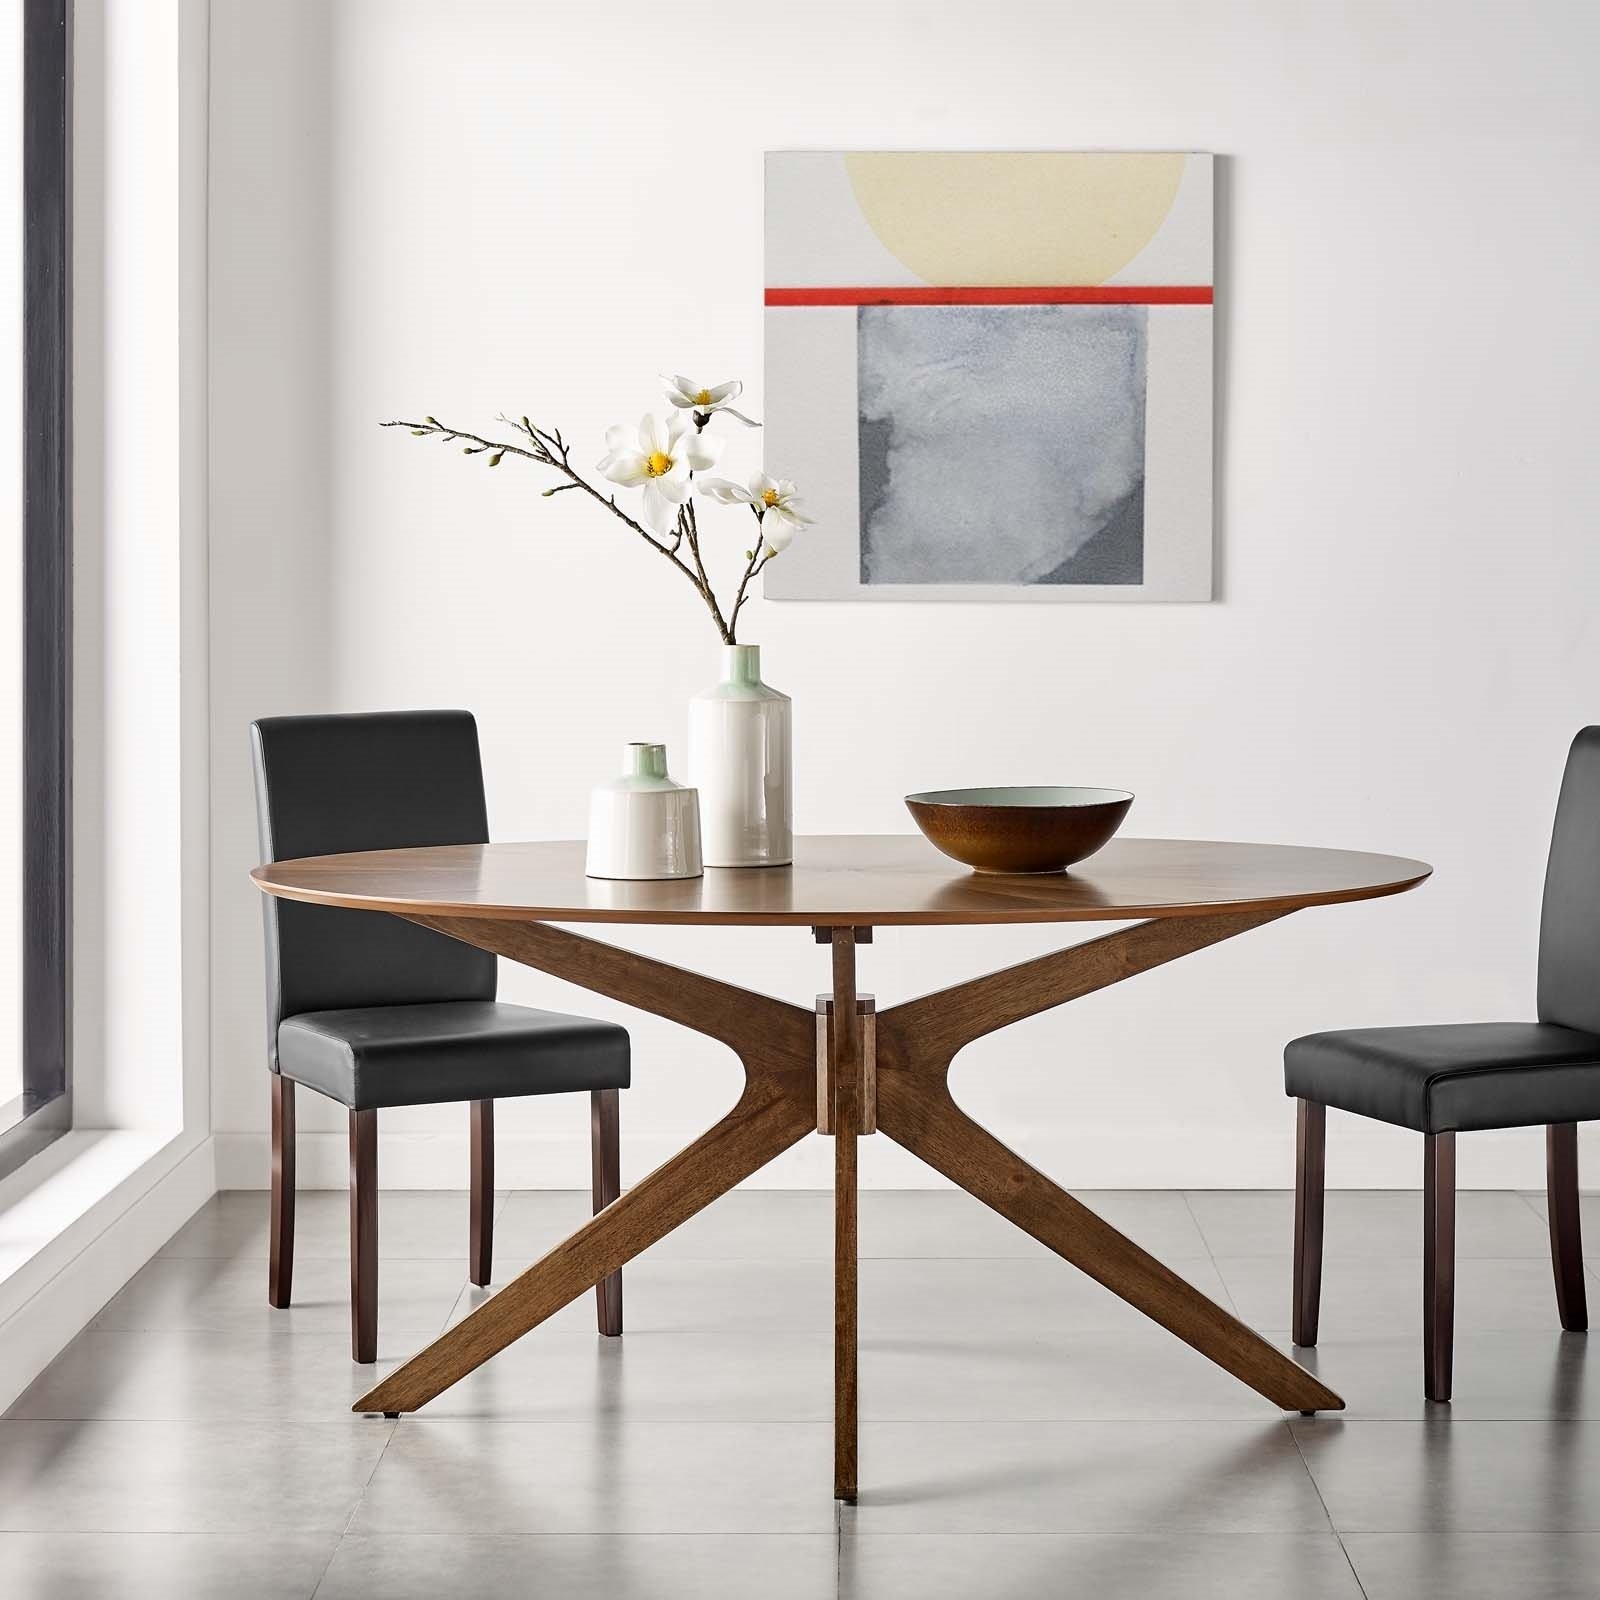 Crossroads 63 oval wood dining table in walnut hyme